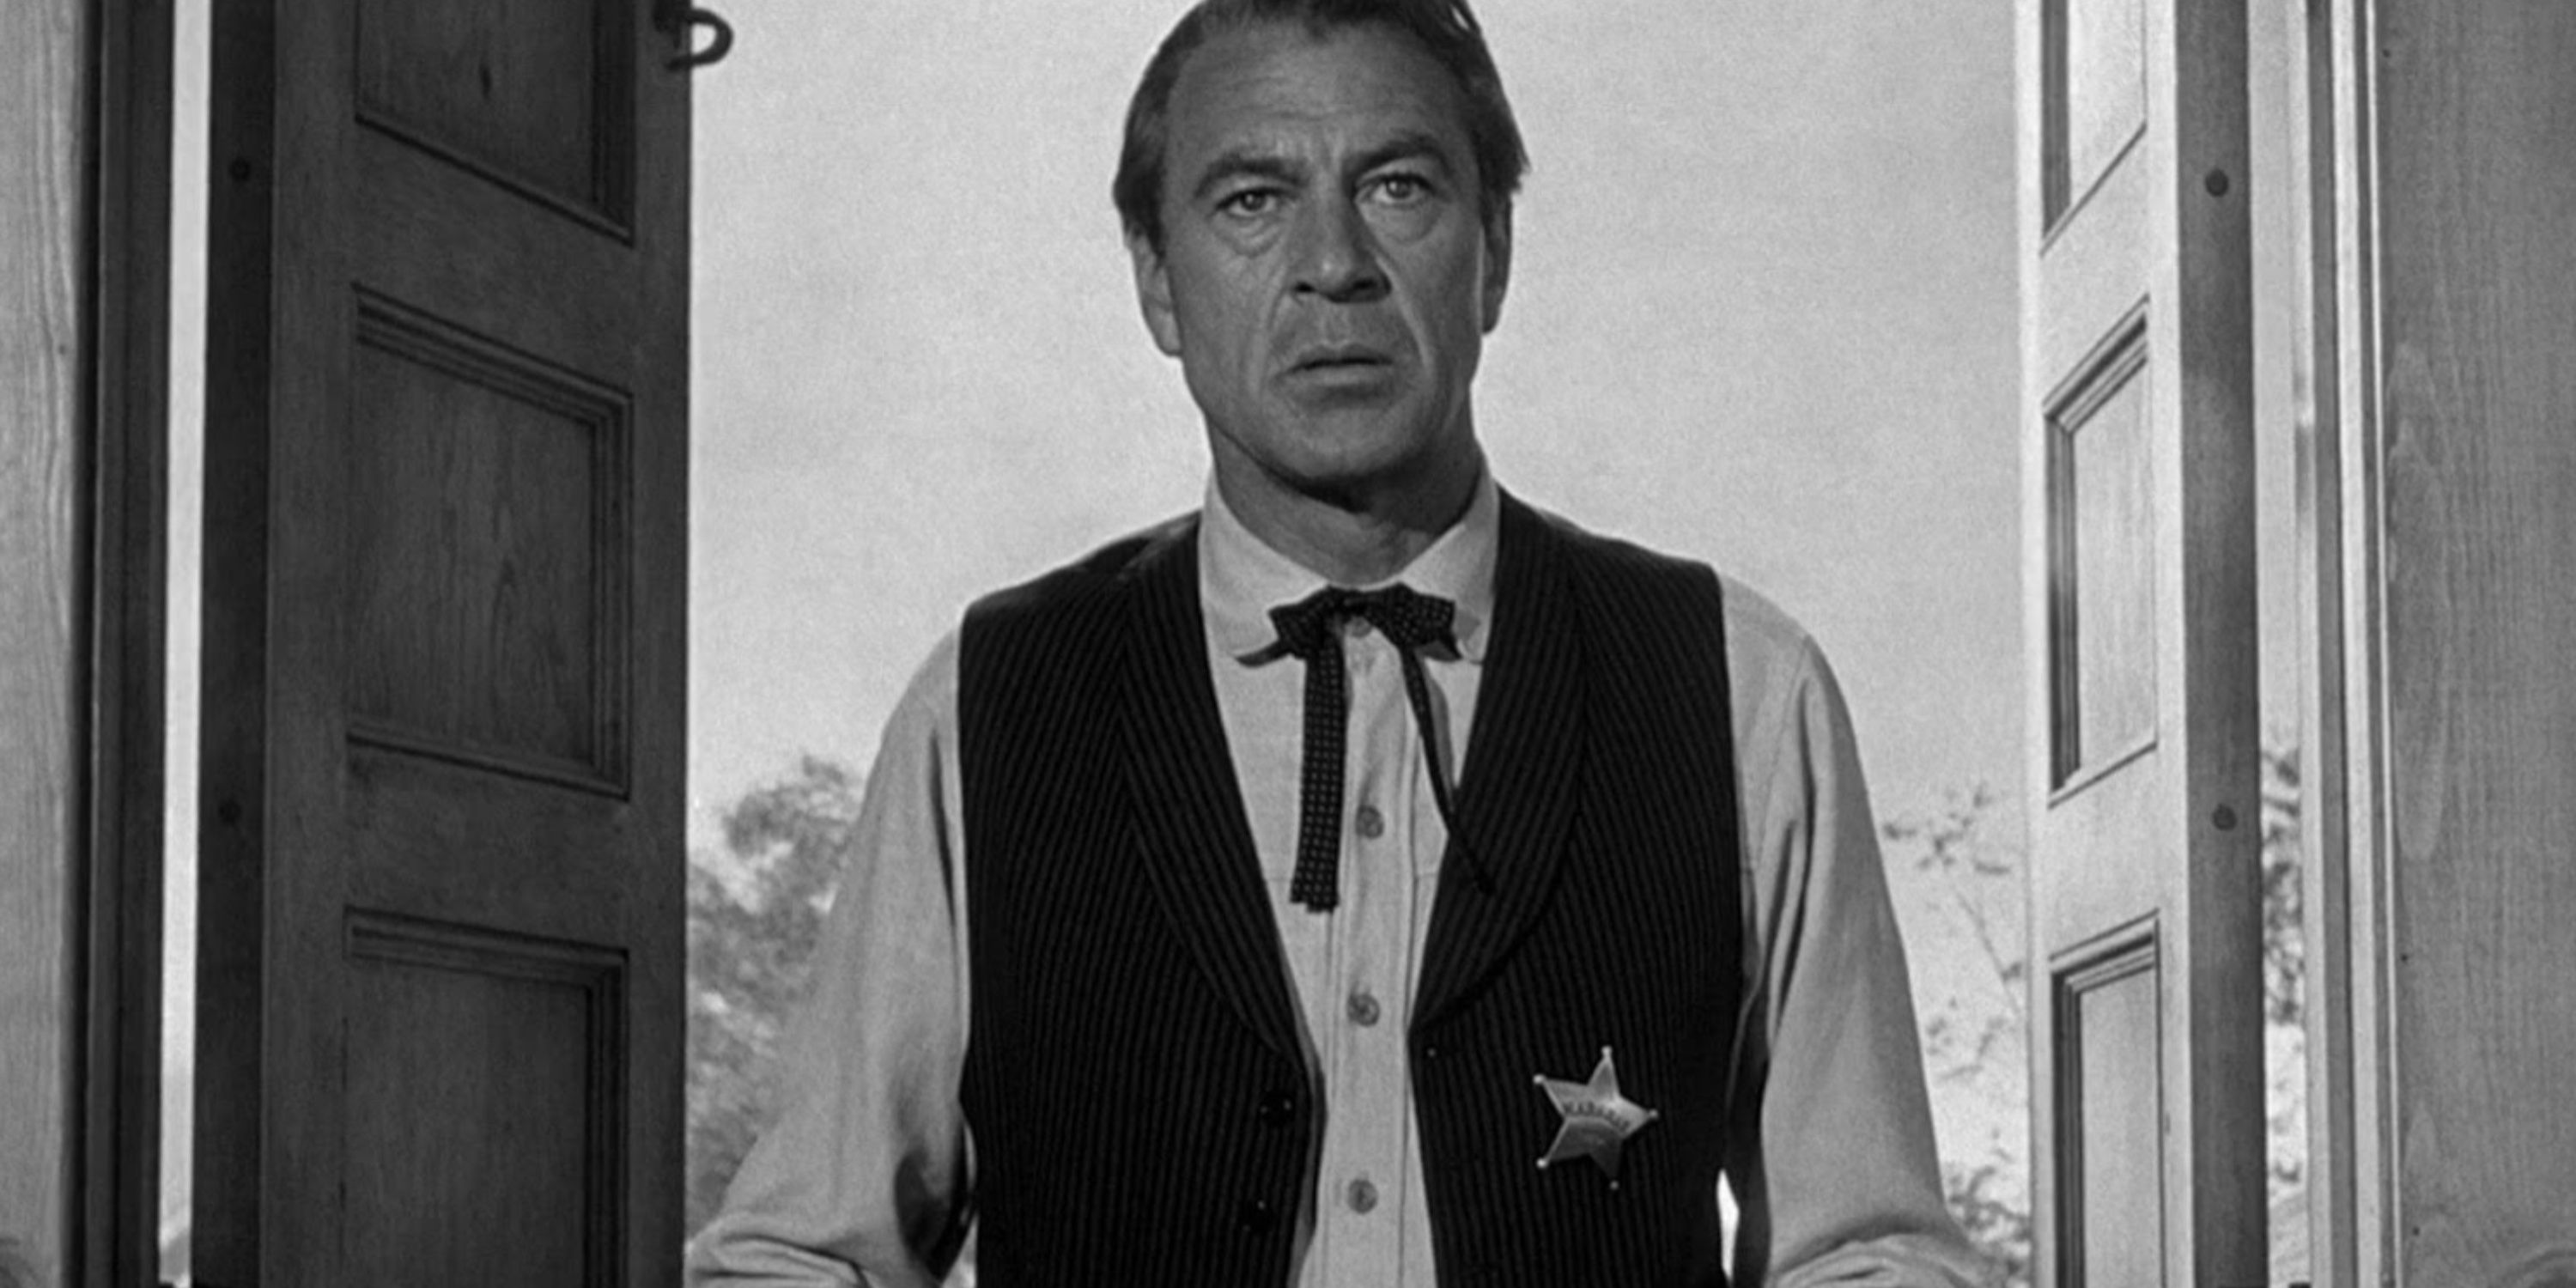 Marshal Will Kane stands in a doorway in High Noon